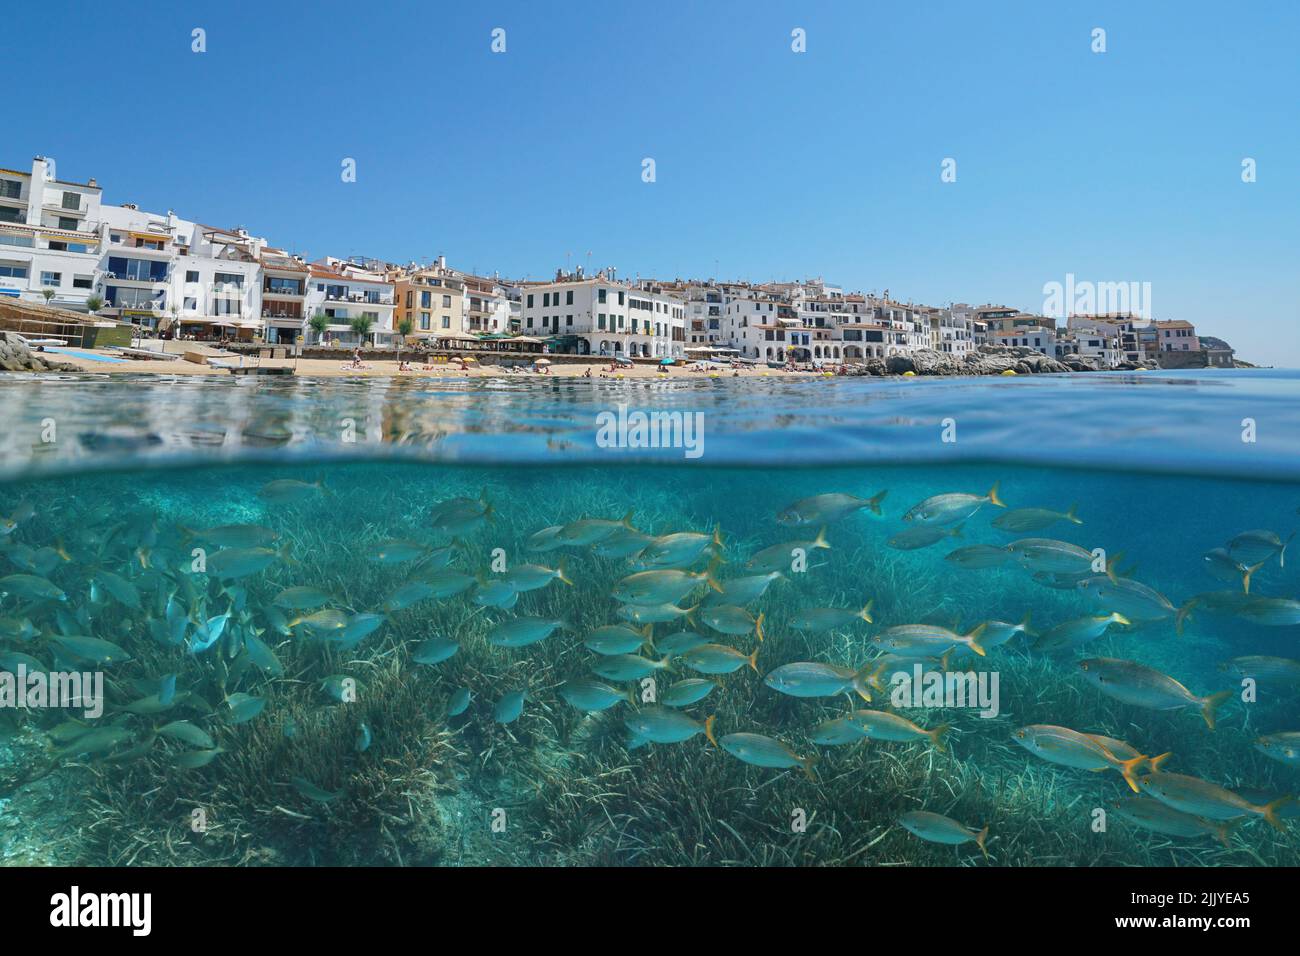 Spanish town on the Mediterranean coast with fish and seagrass underwater sea, Spain, Costa Brava, Calella de Palafrugell, split level view Stock Photo